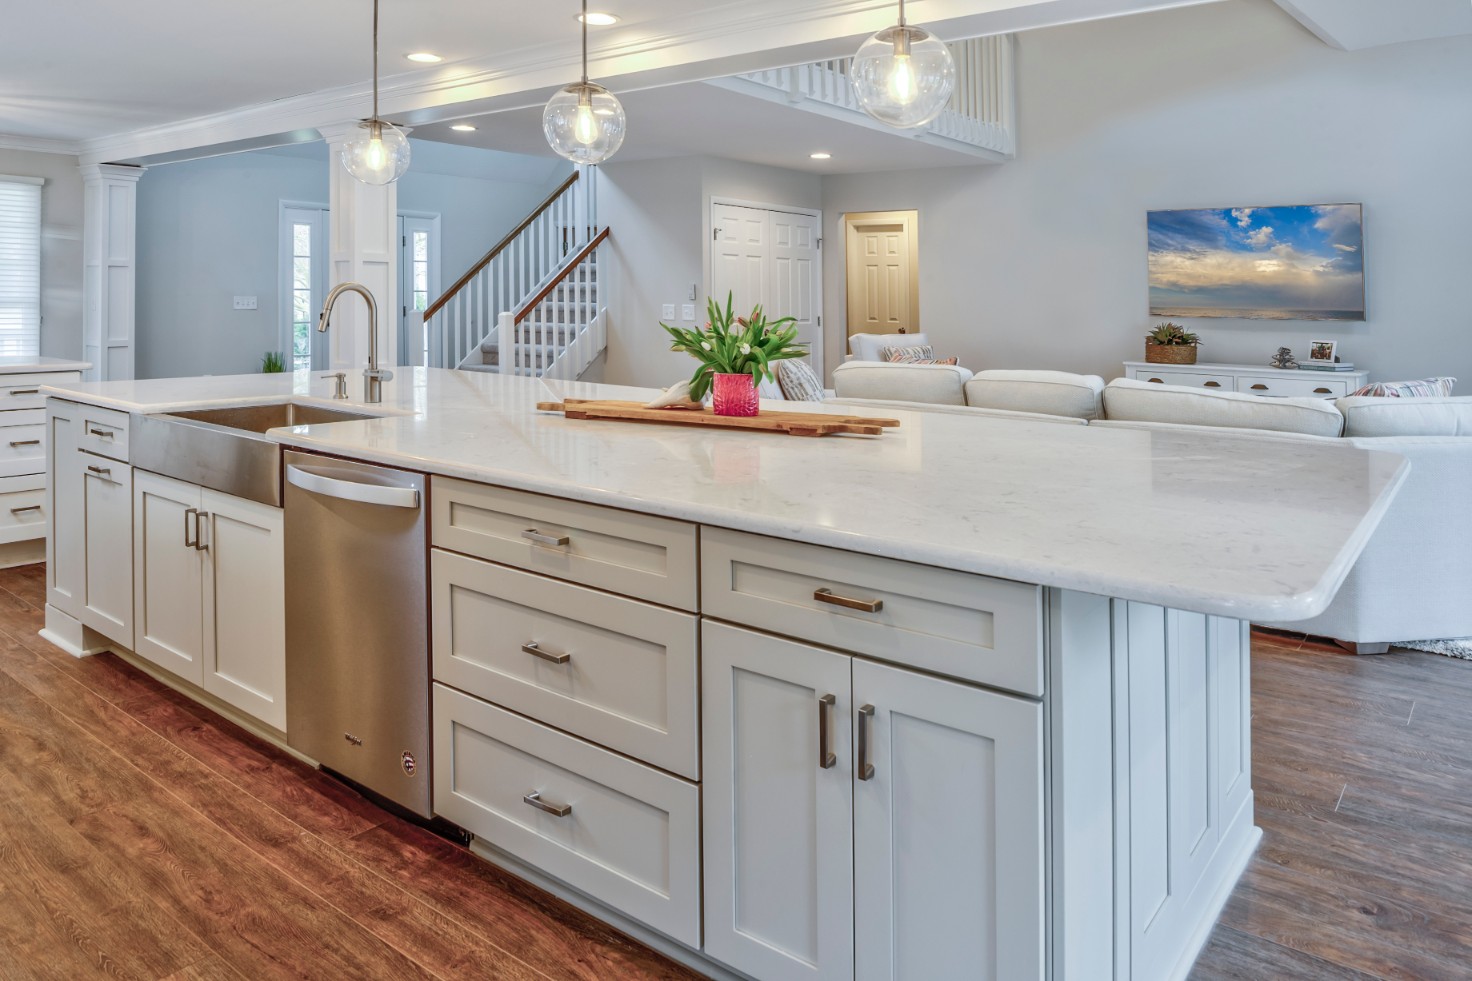 Canal Way Renovation in Bethany Beach DE - Kitchen with Center Island with Farm Sink and White Shaker Cabinets